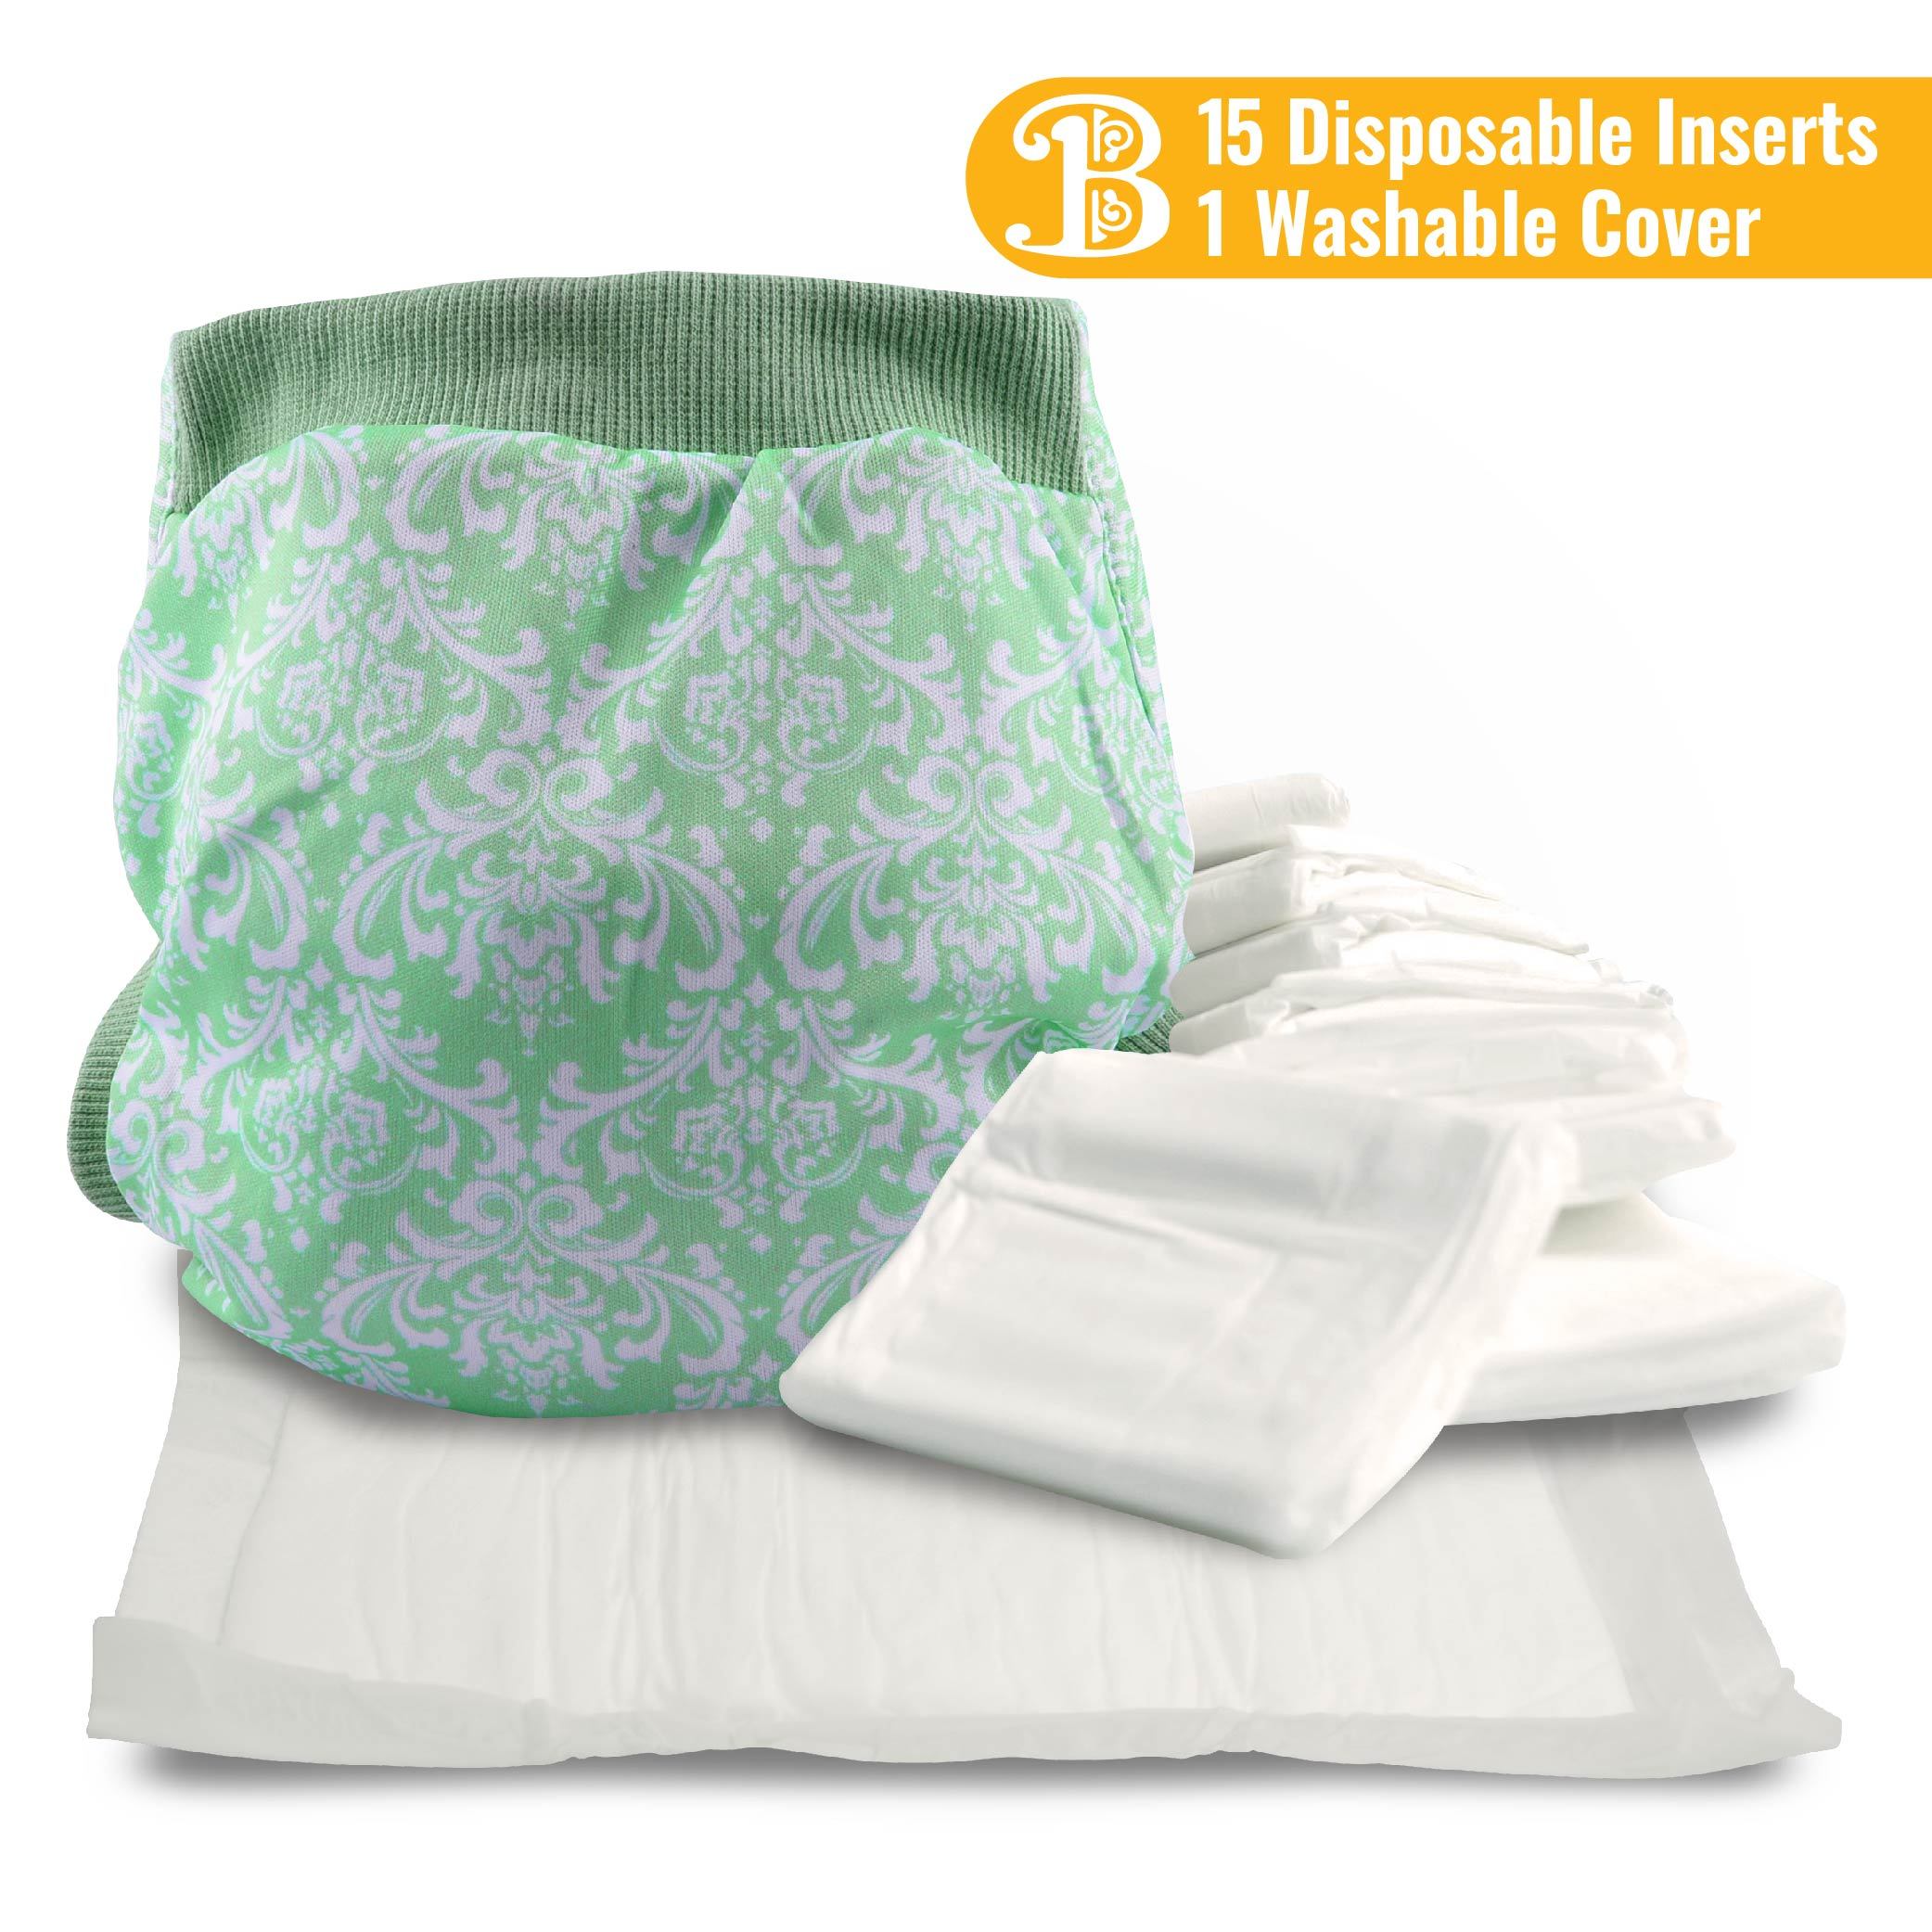 Baby's butt may get rashes and other skin problems when using a baby diaper, Rashes bam is very helpful to your baby to keep them active, happy, and calm.